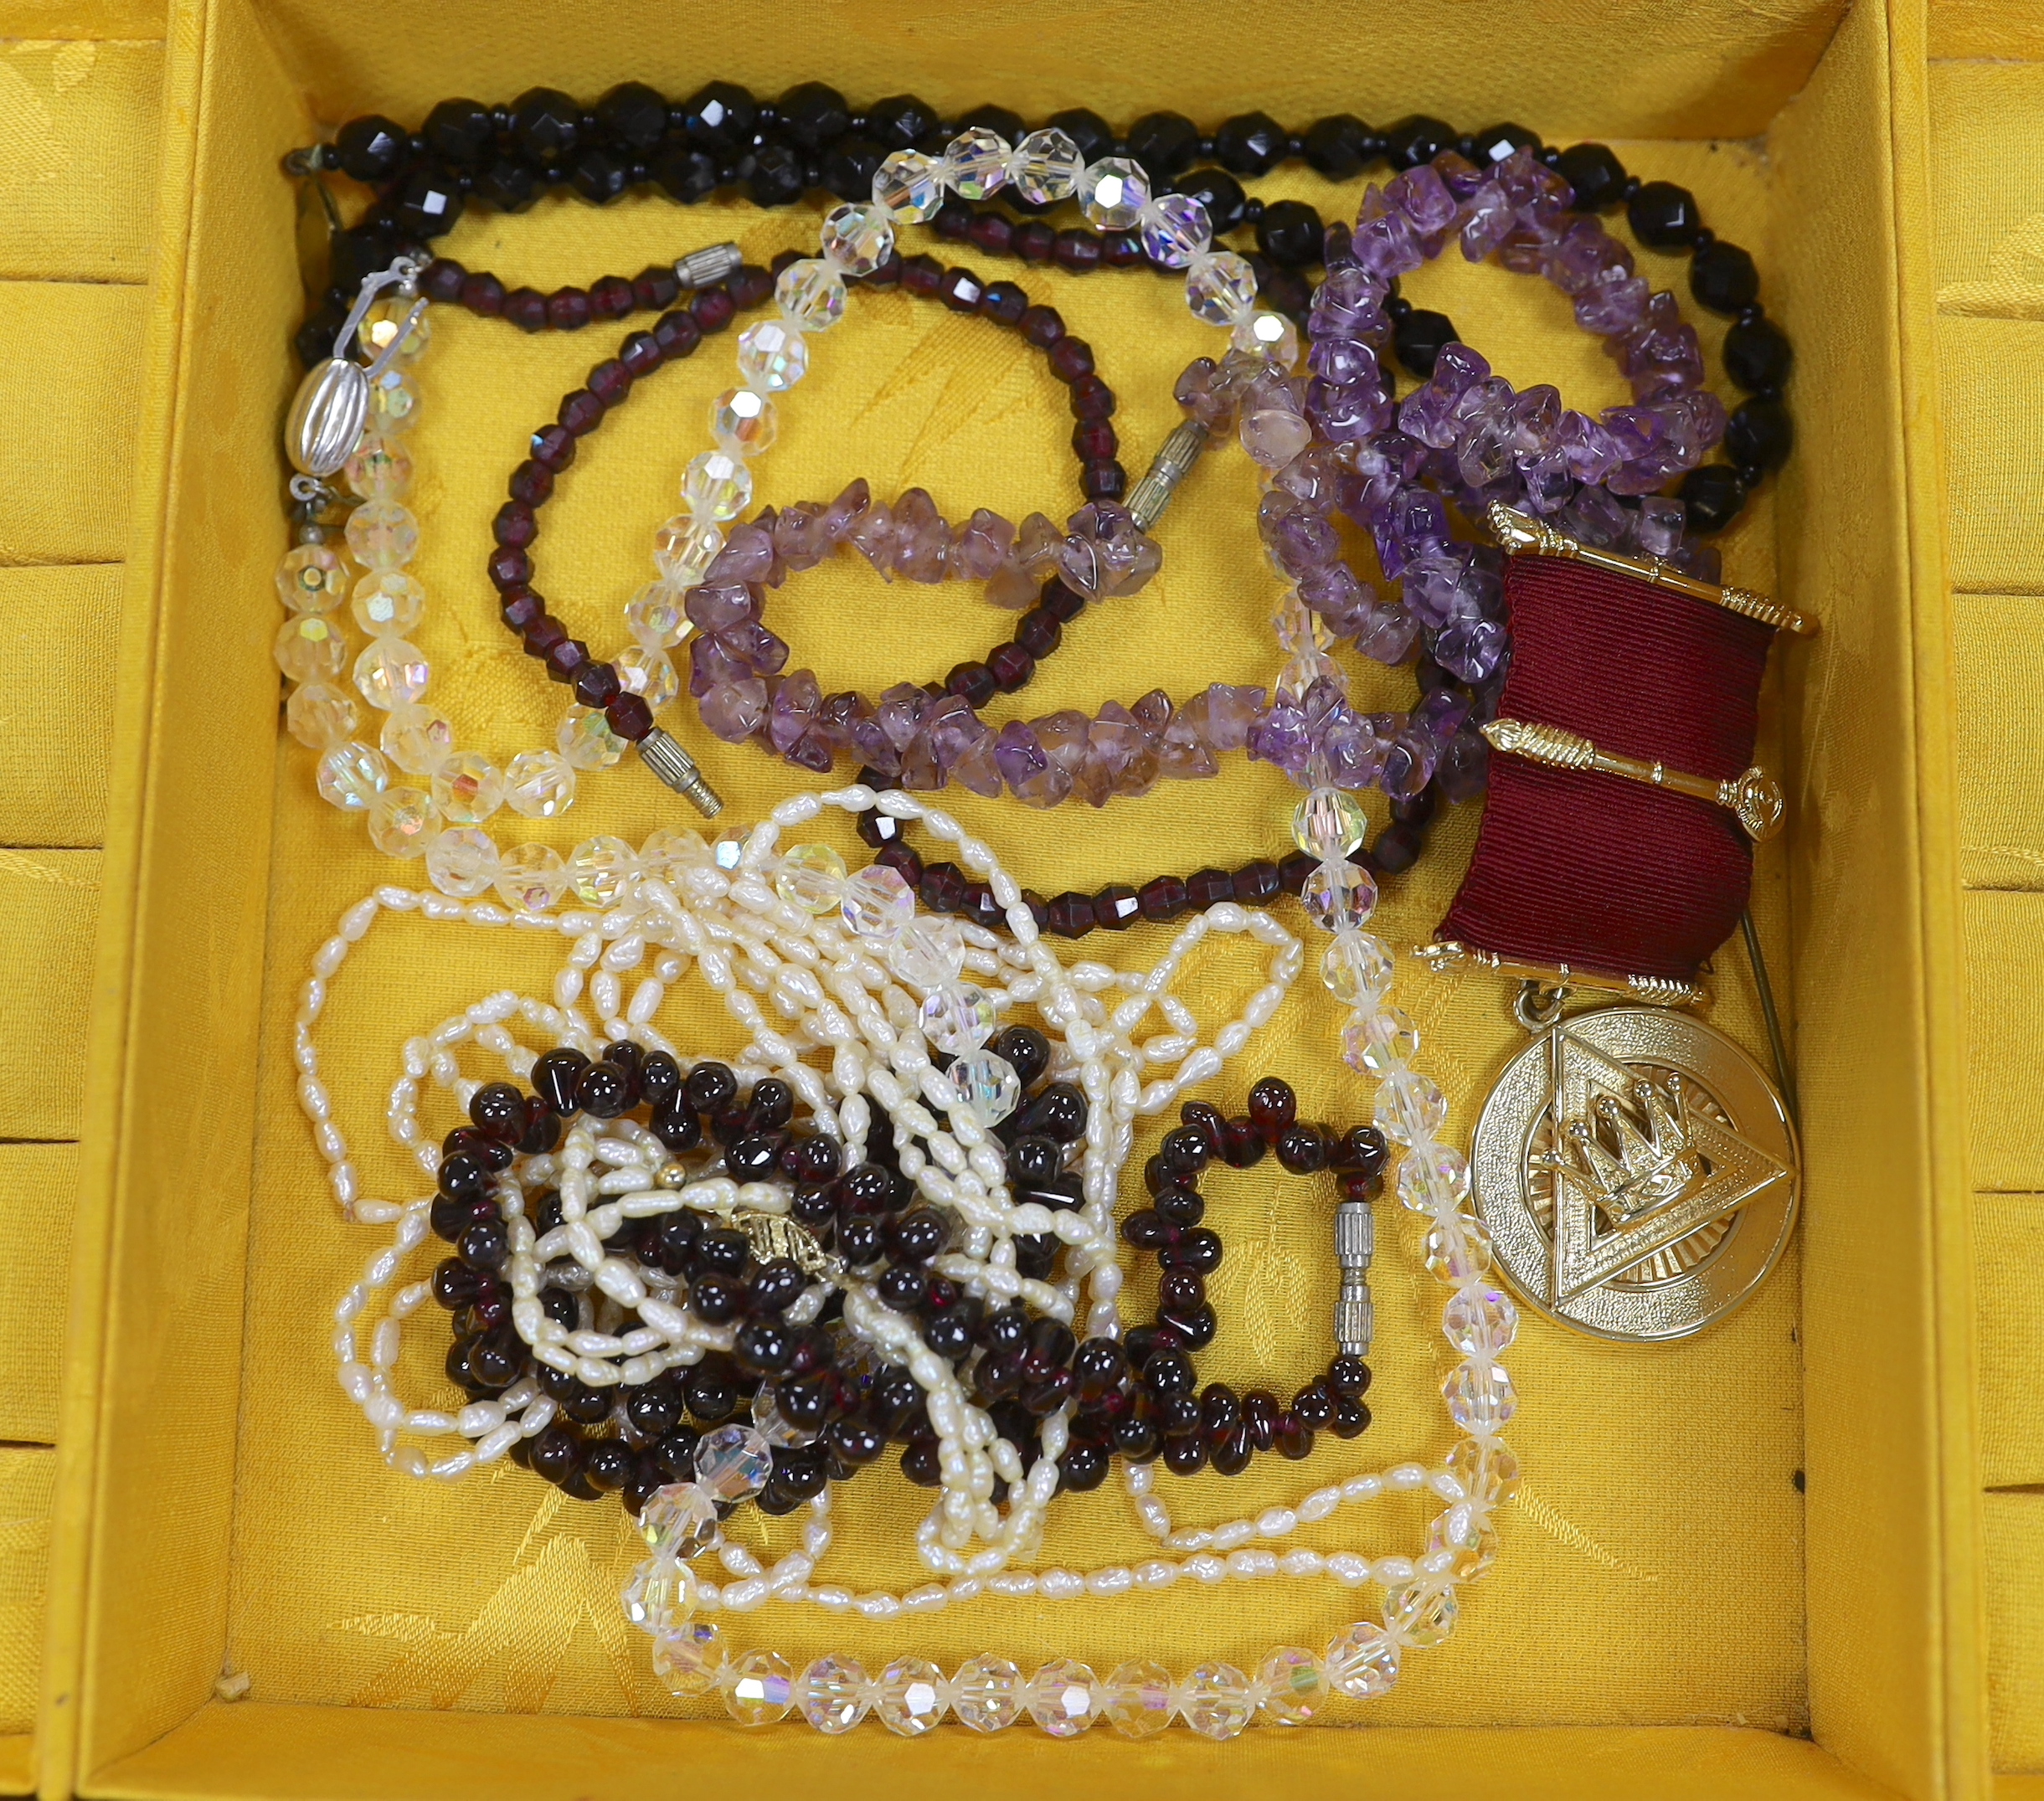 A Dior handbag, tiger's eye bead necklace and other costume jewellery